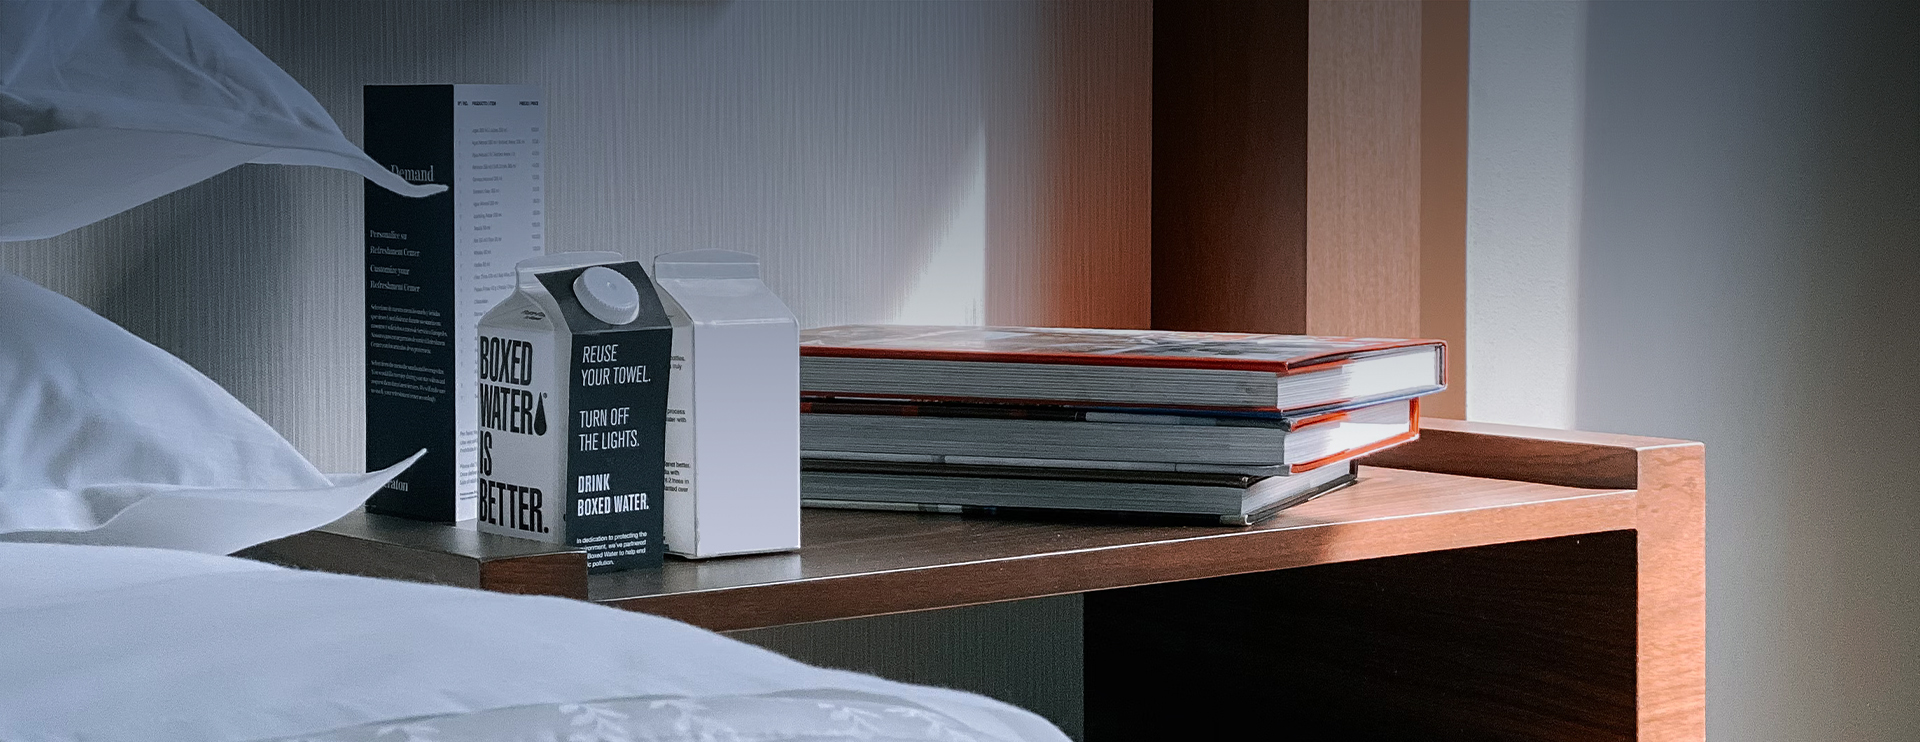 view of a nightstand with books and drinks in cartons on top